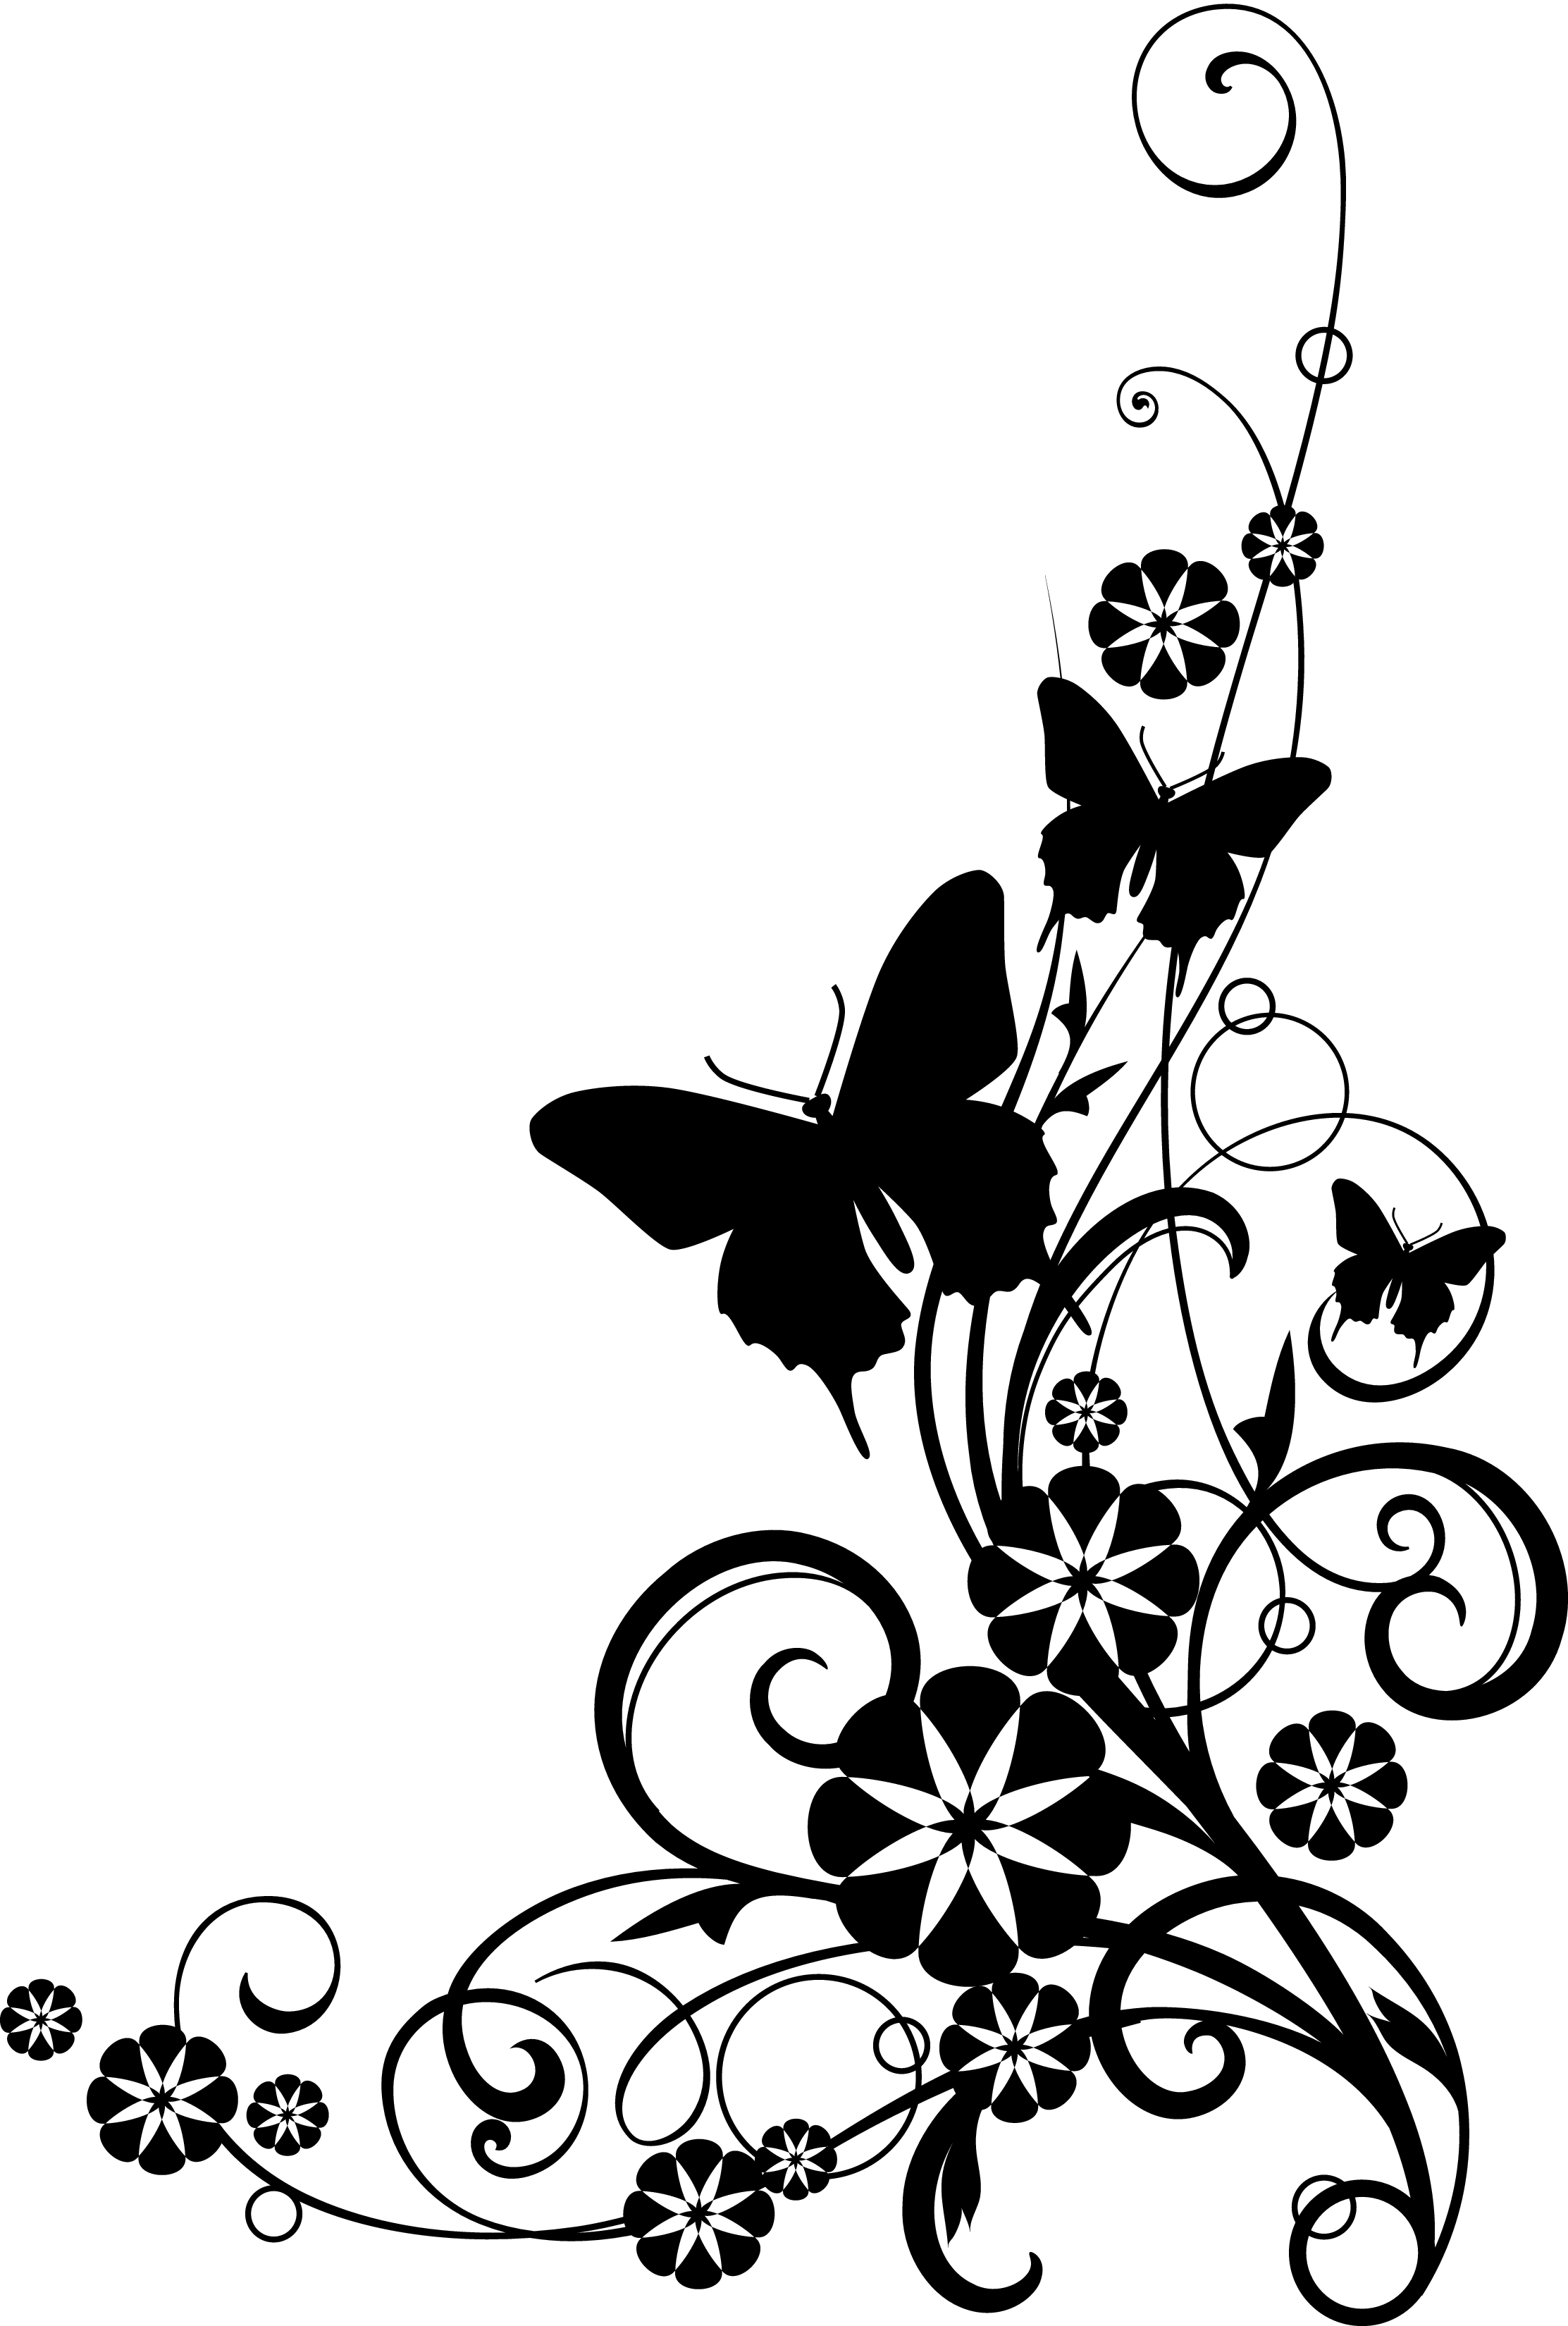 Drawing Flowers And Vines - ClipArt Best